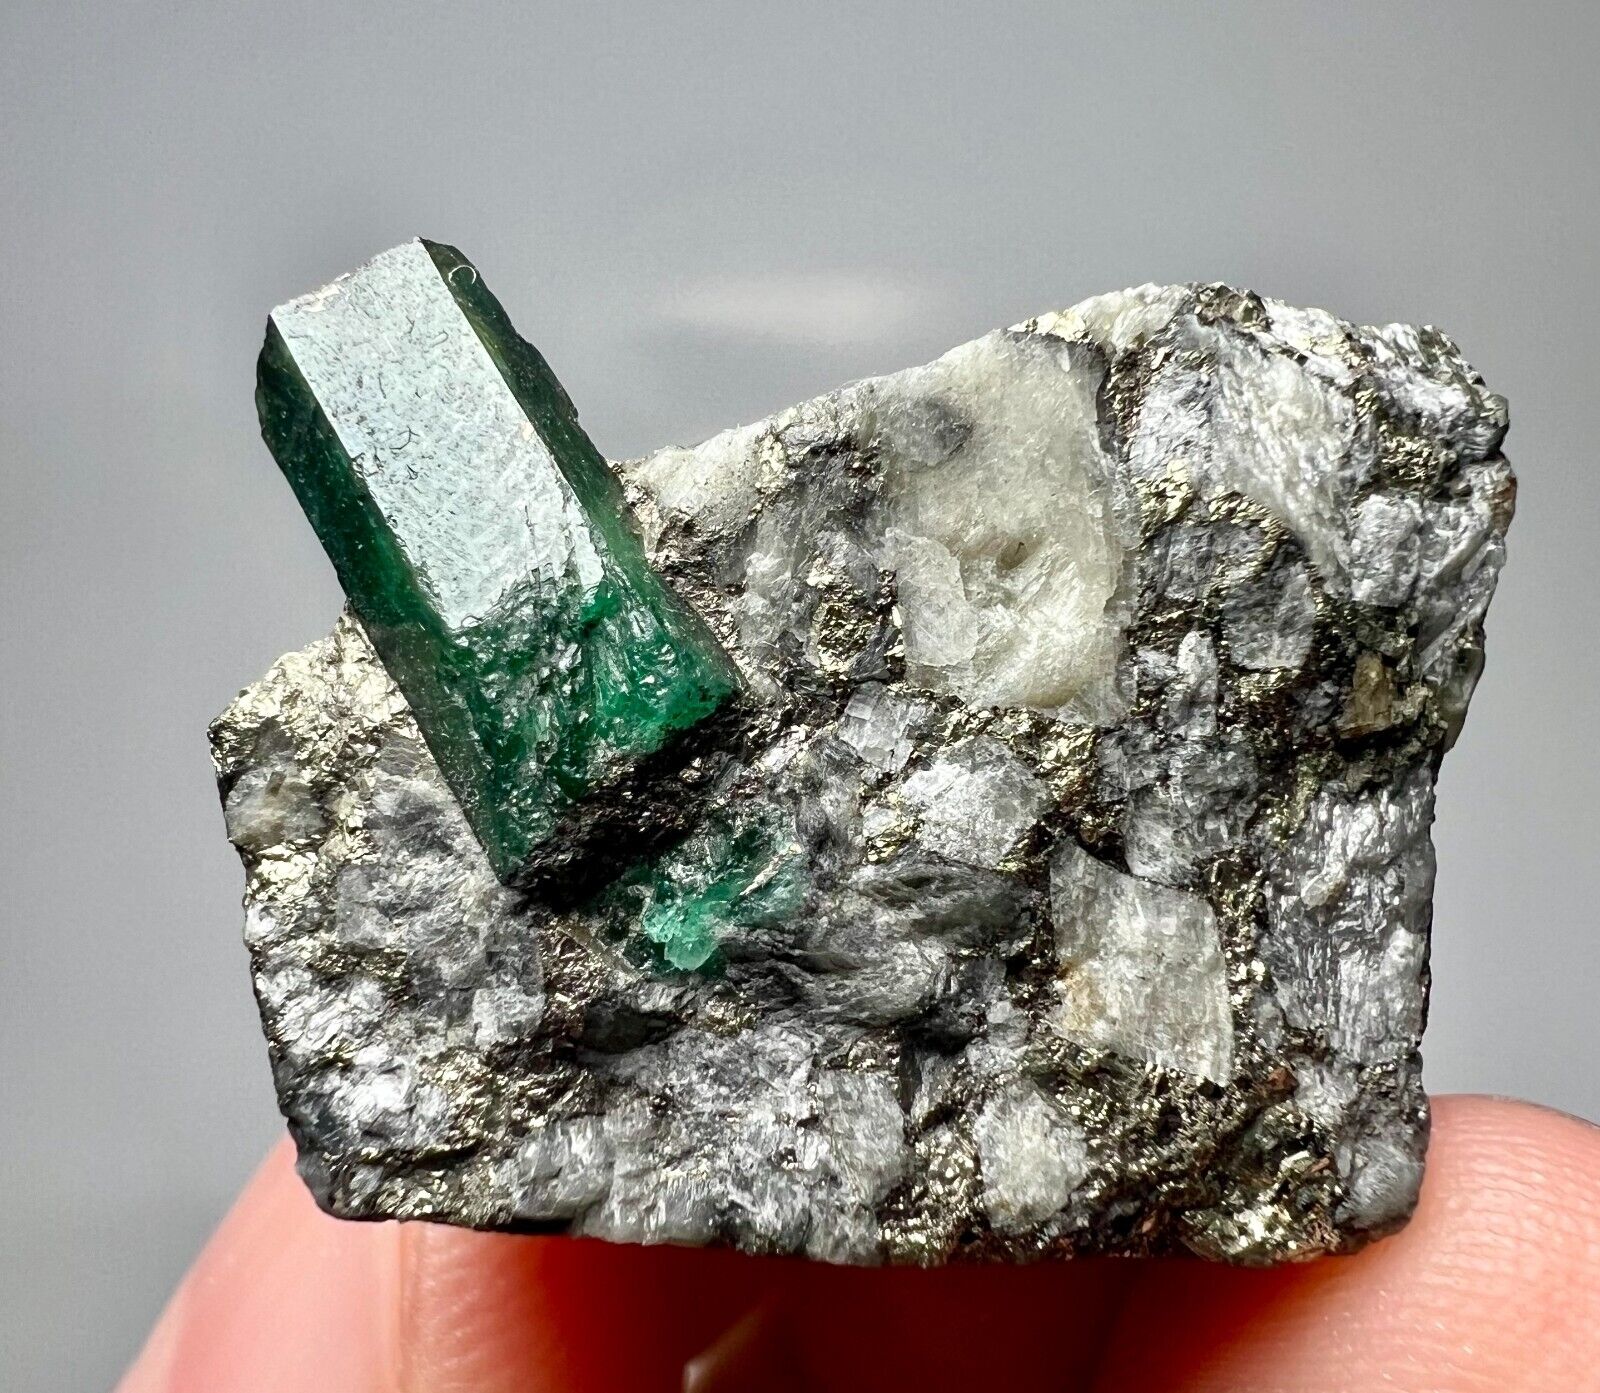 60 CT Well Terminated Top Green Panjsher Emerald Crystal With Pyrite On Matrix